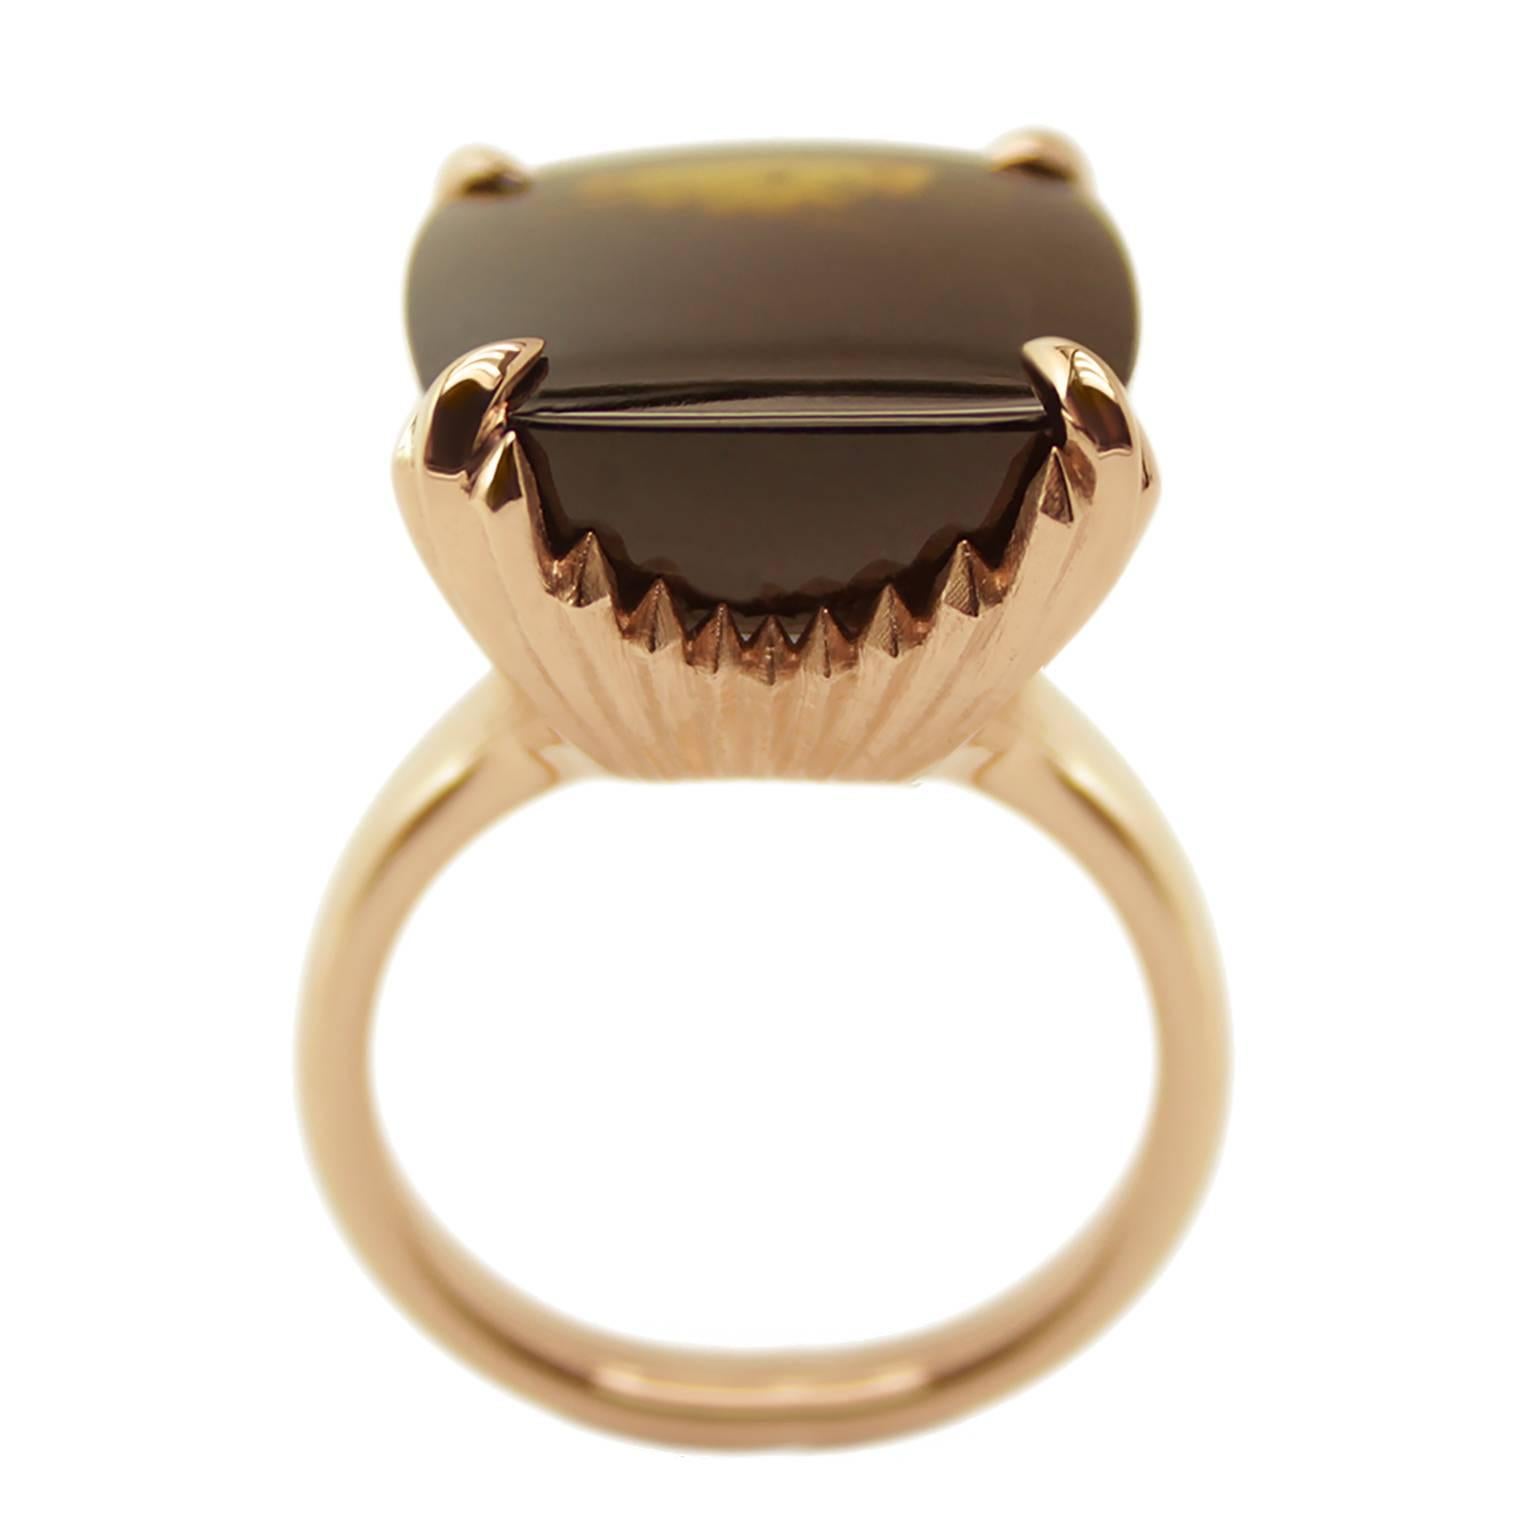 A stunning 5.5ct buff top deep brown tourmaline stone, set into a four claw 9ct rose gold ring.

The detail carries on underneath to create a raised mount of grooves and filed angles. This really catches the light as you move the ring. Its of a